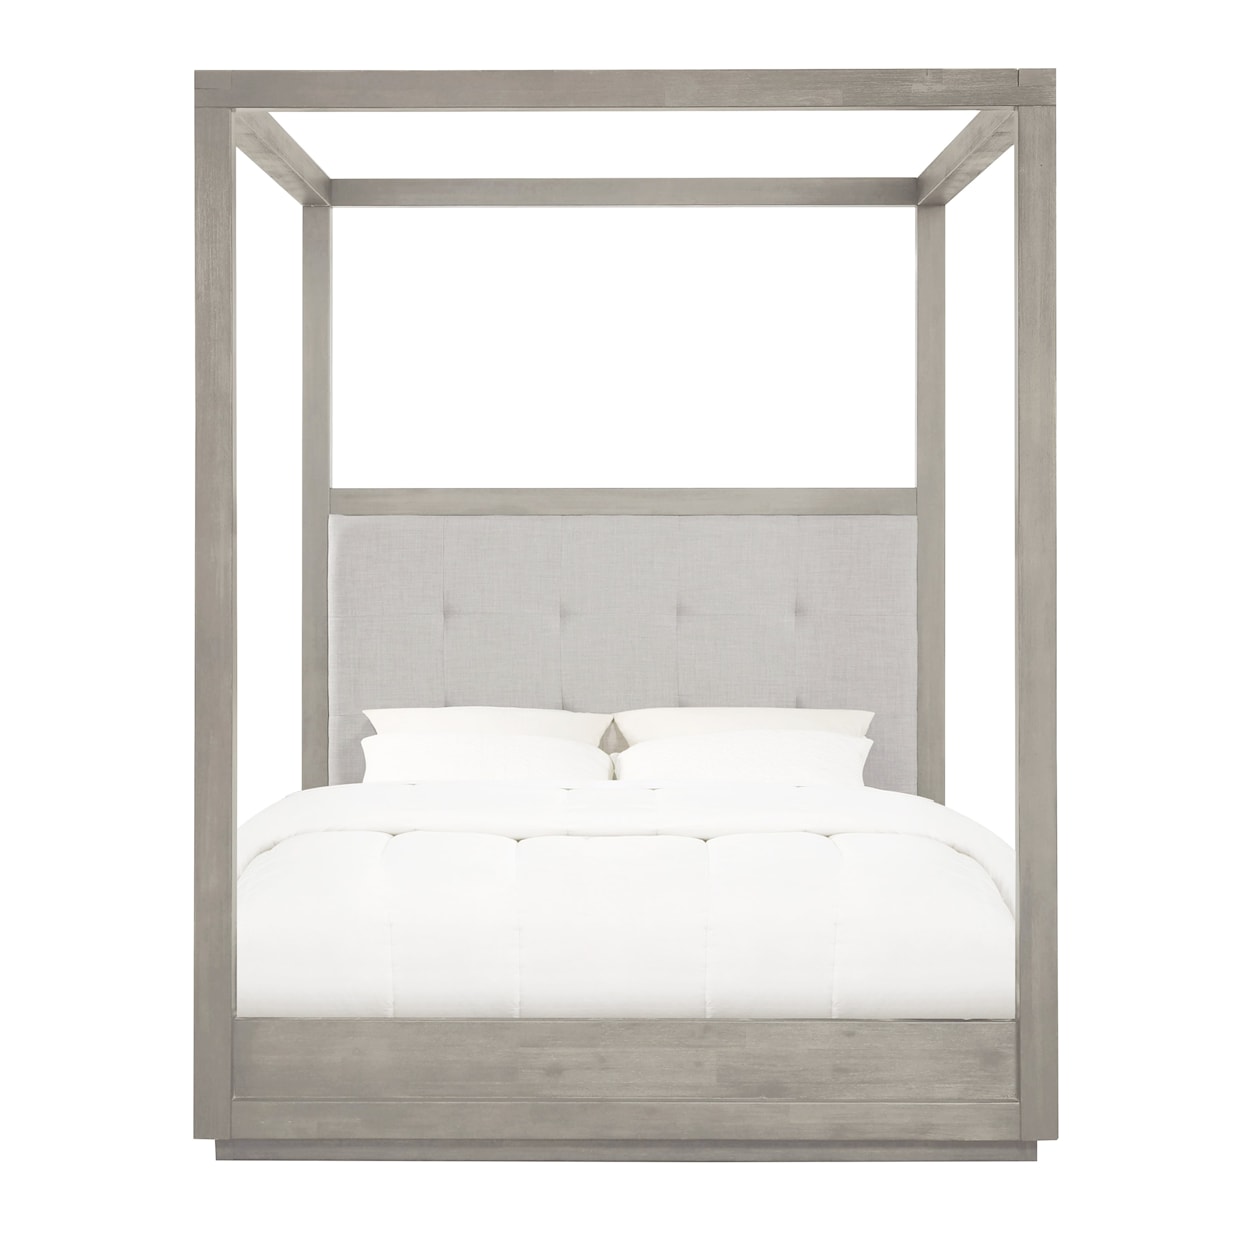 Modus International Oxford King Canopy Bed